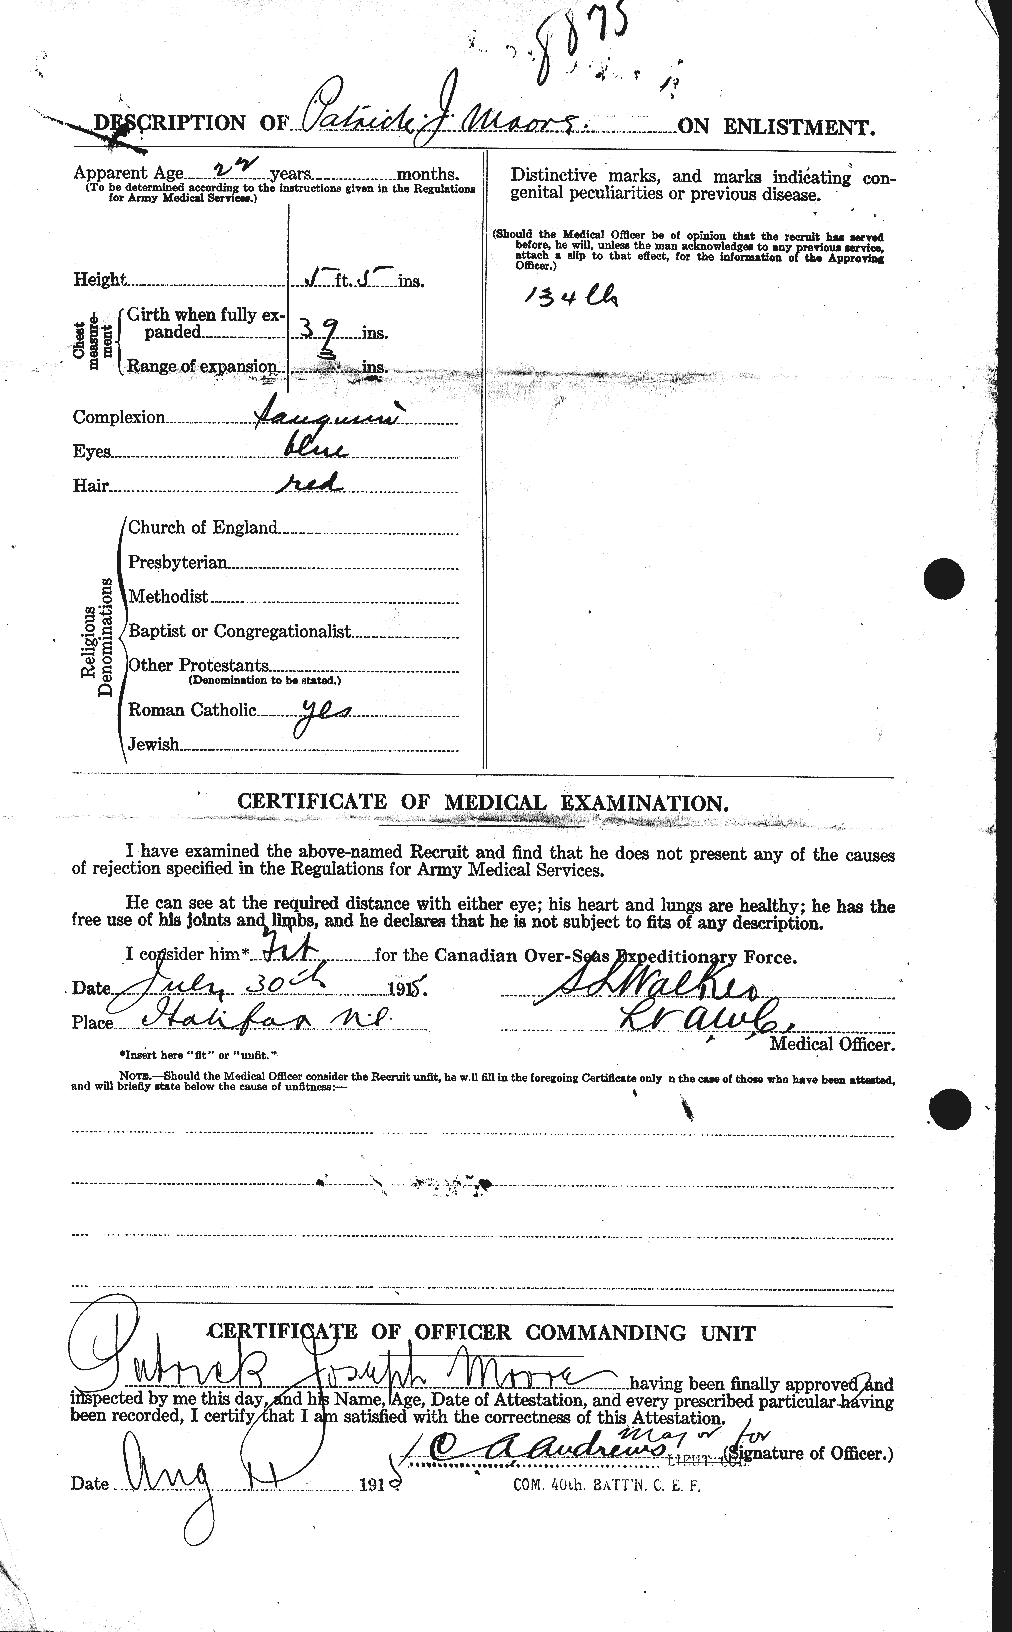 Personnel Records of the First World War - CEF 503476b